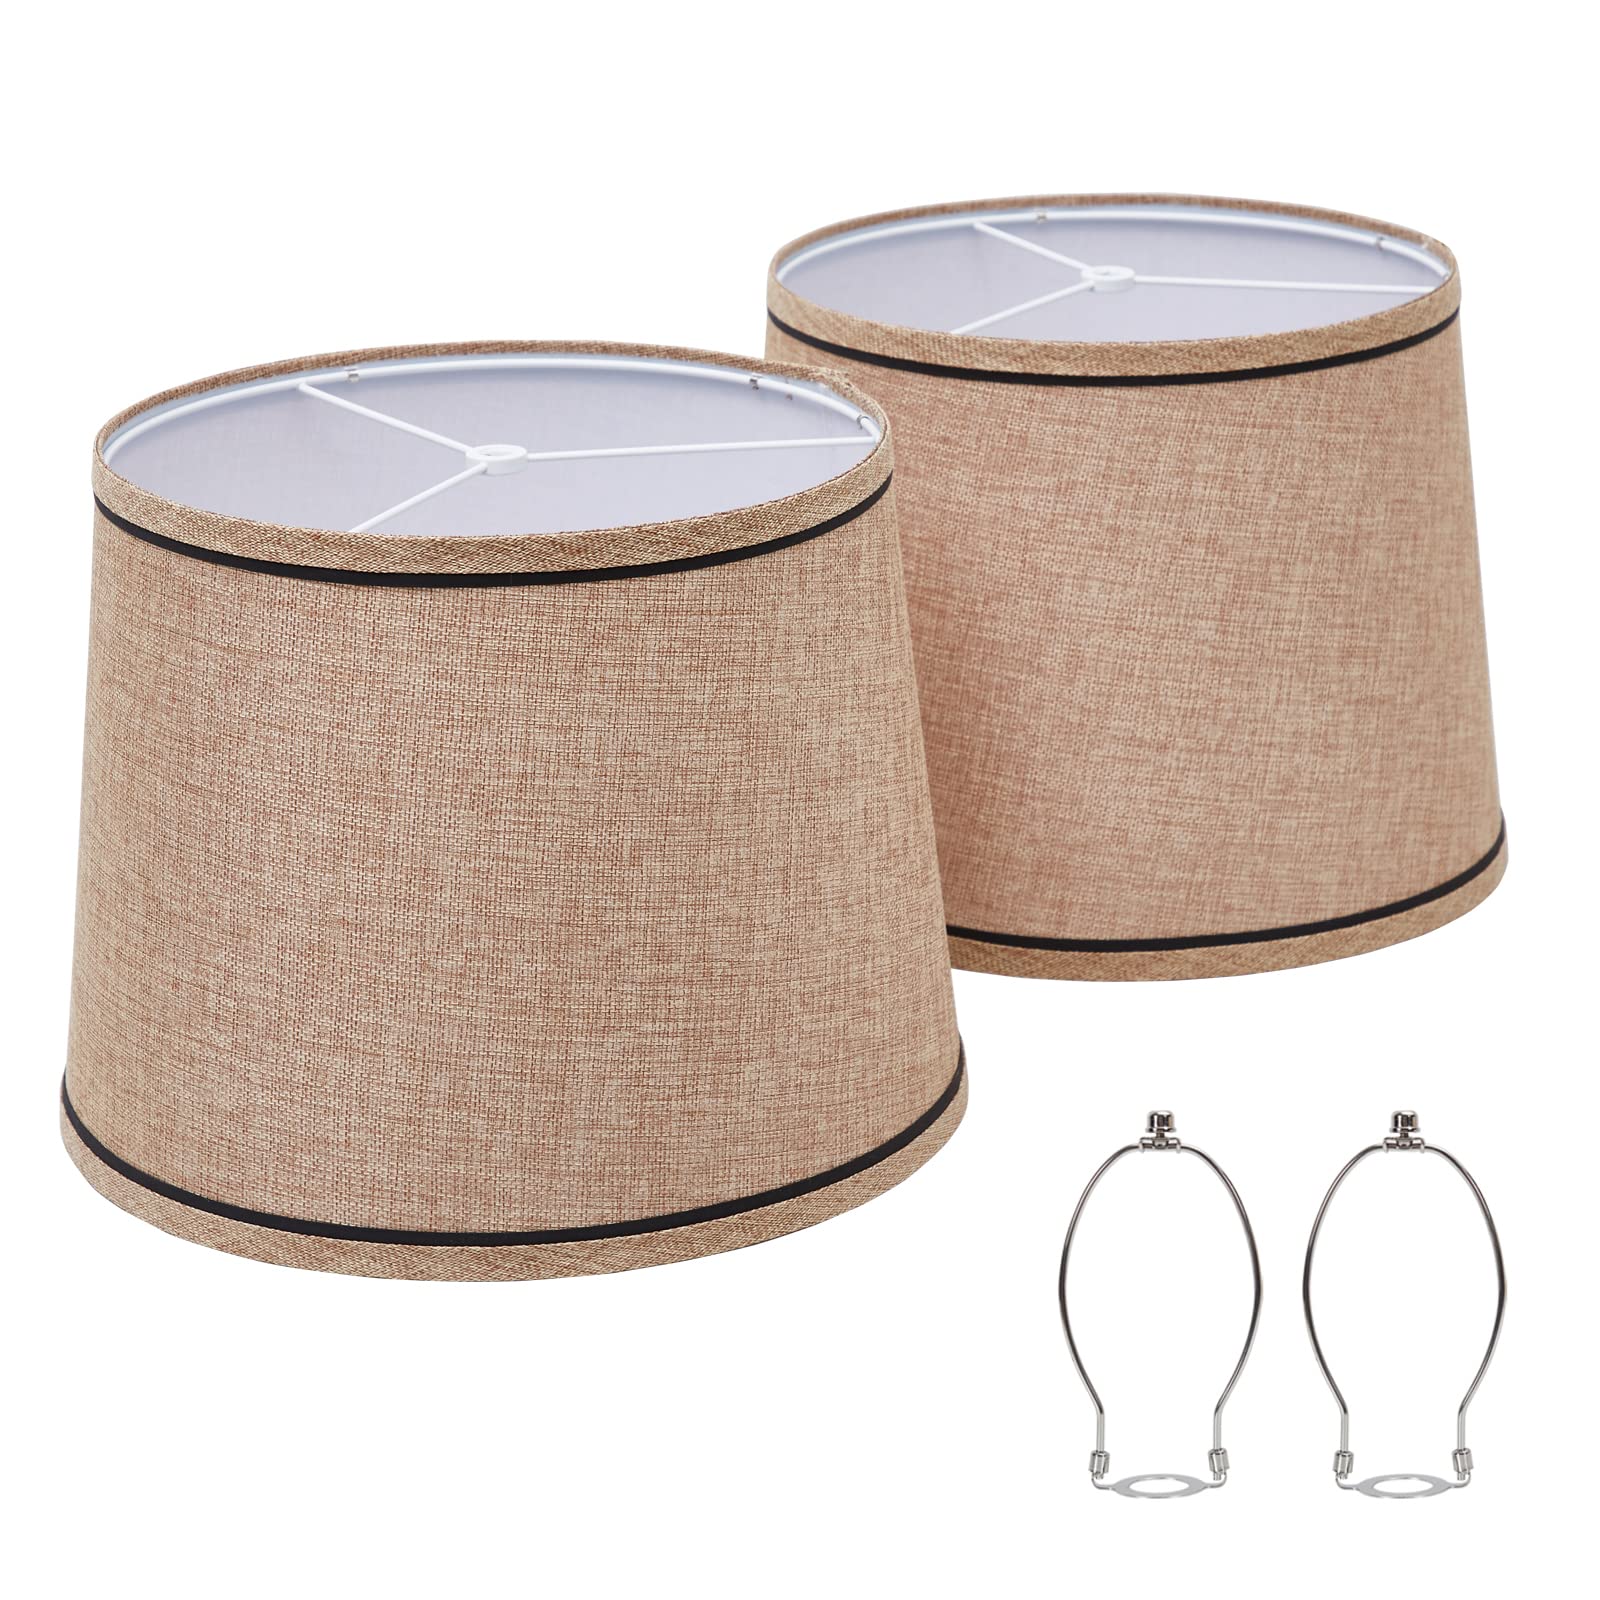 Luvkczc Lampshades Set of 2, Medium Fabric Lampshades for Table Lamps, Floor Lamps, 13" Top x 11" Bottom x 10" High (Spider Fitter), Han